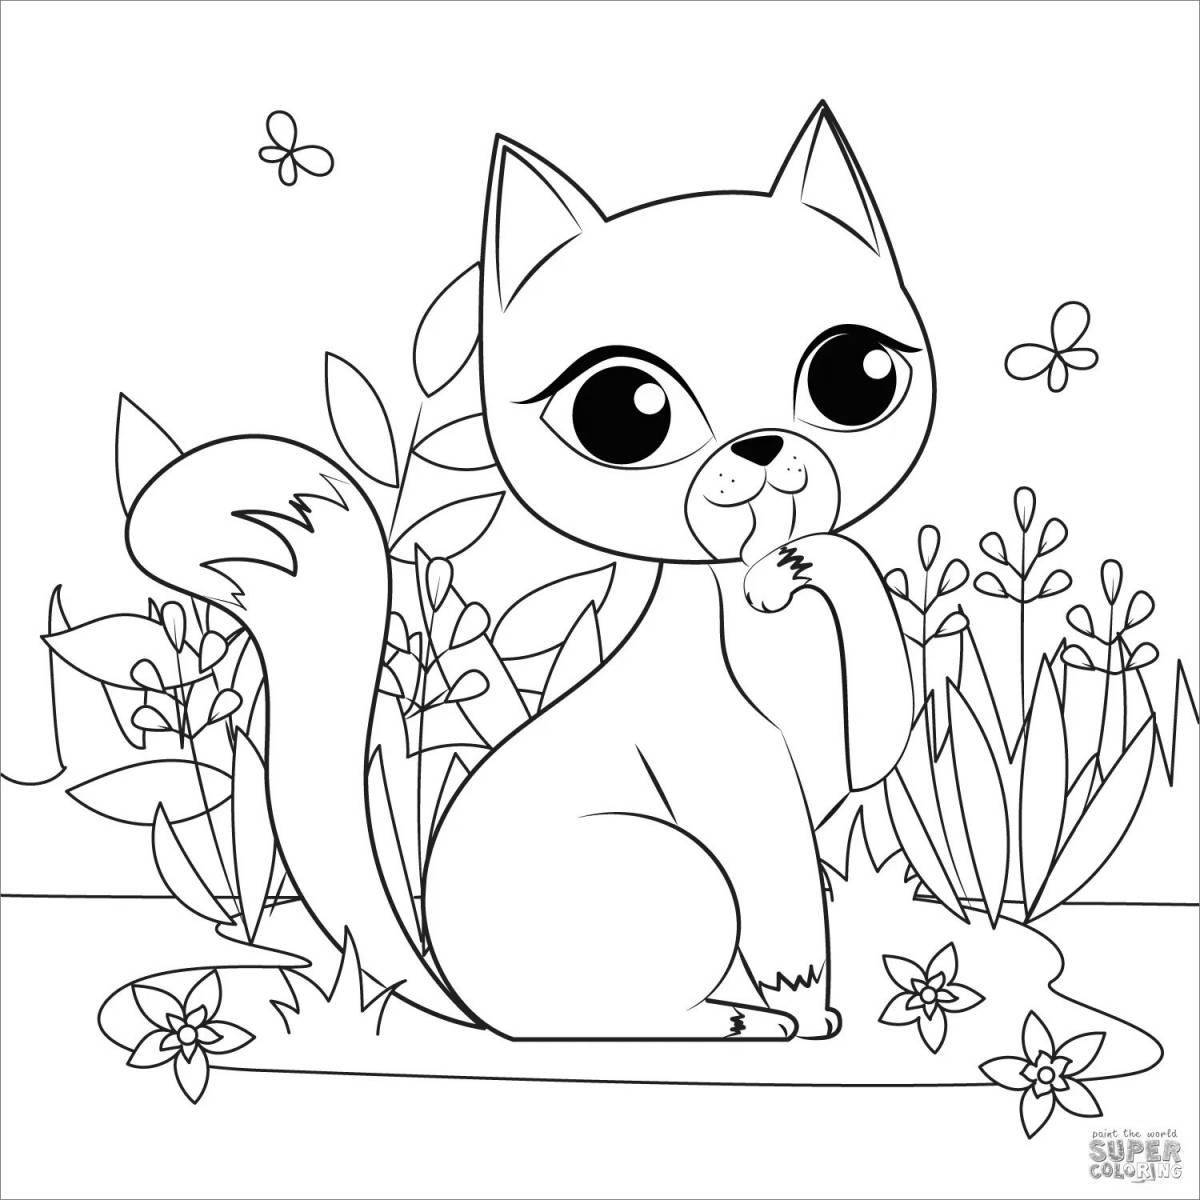 Bright kittens coloring for children 6-7 years old